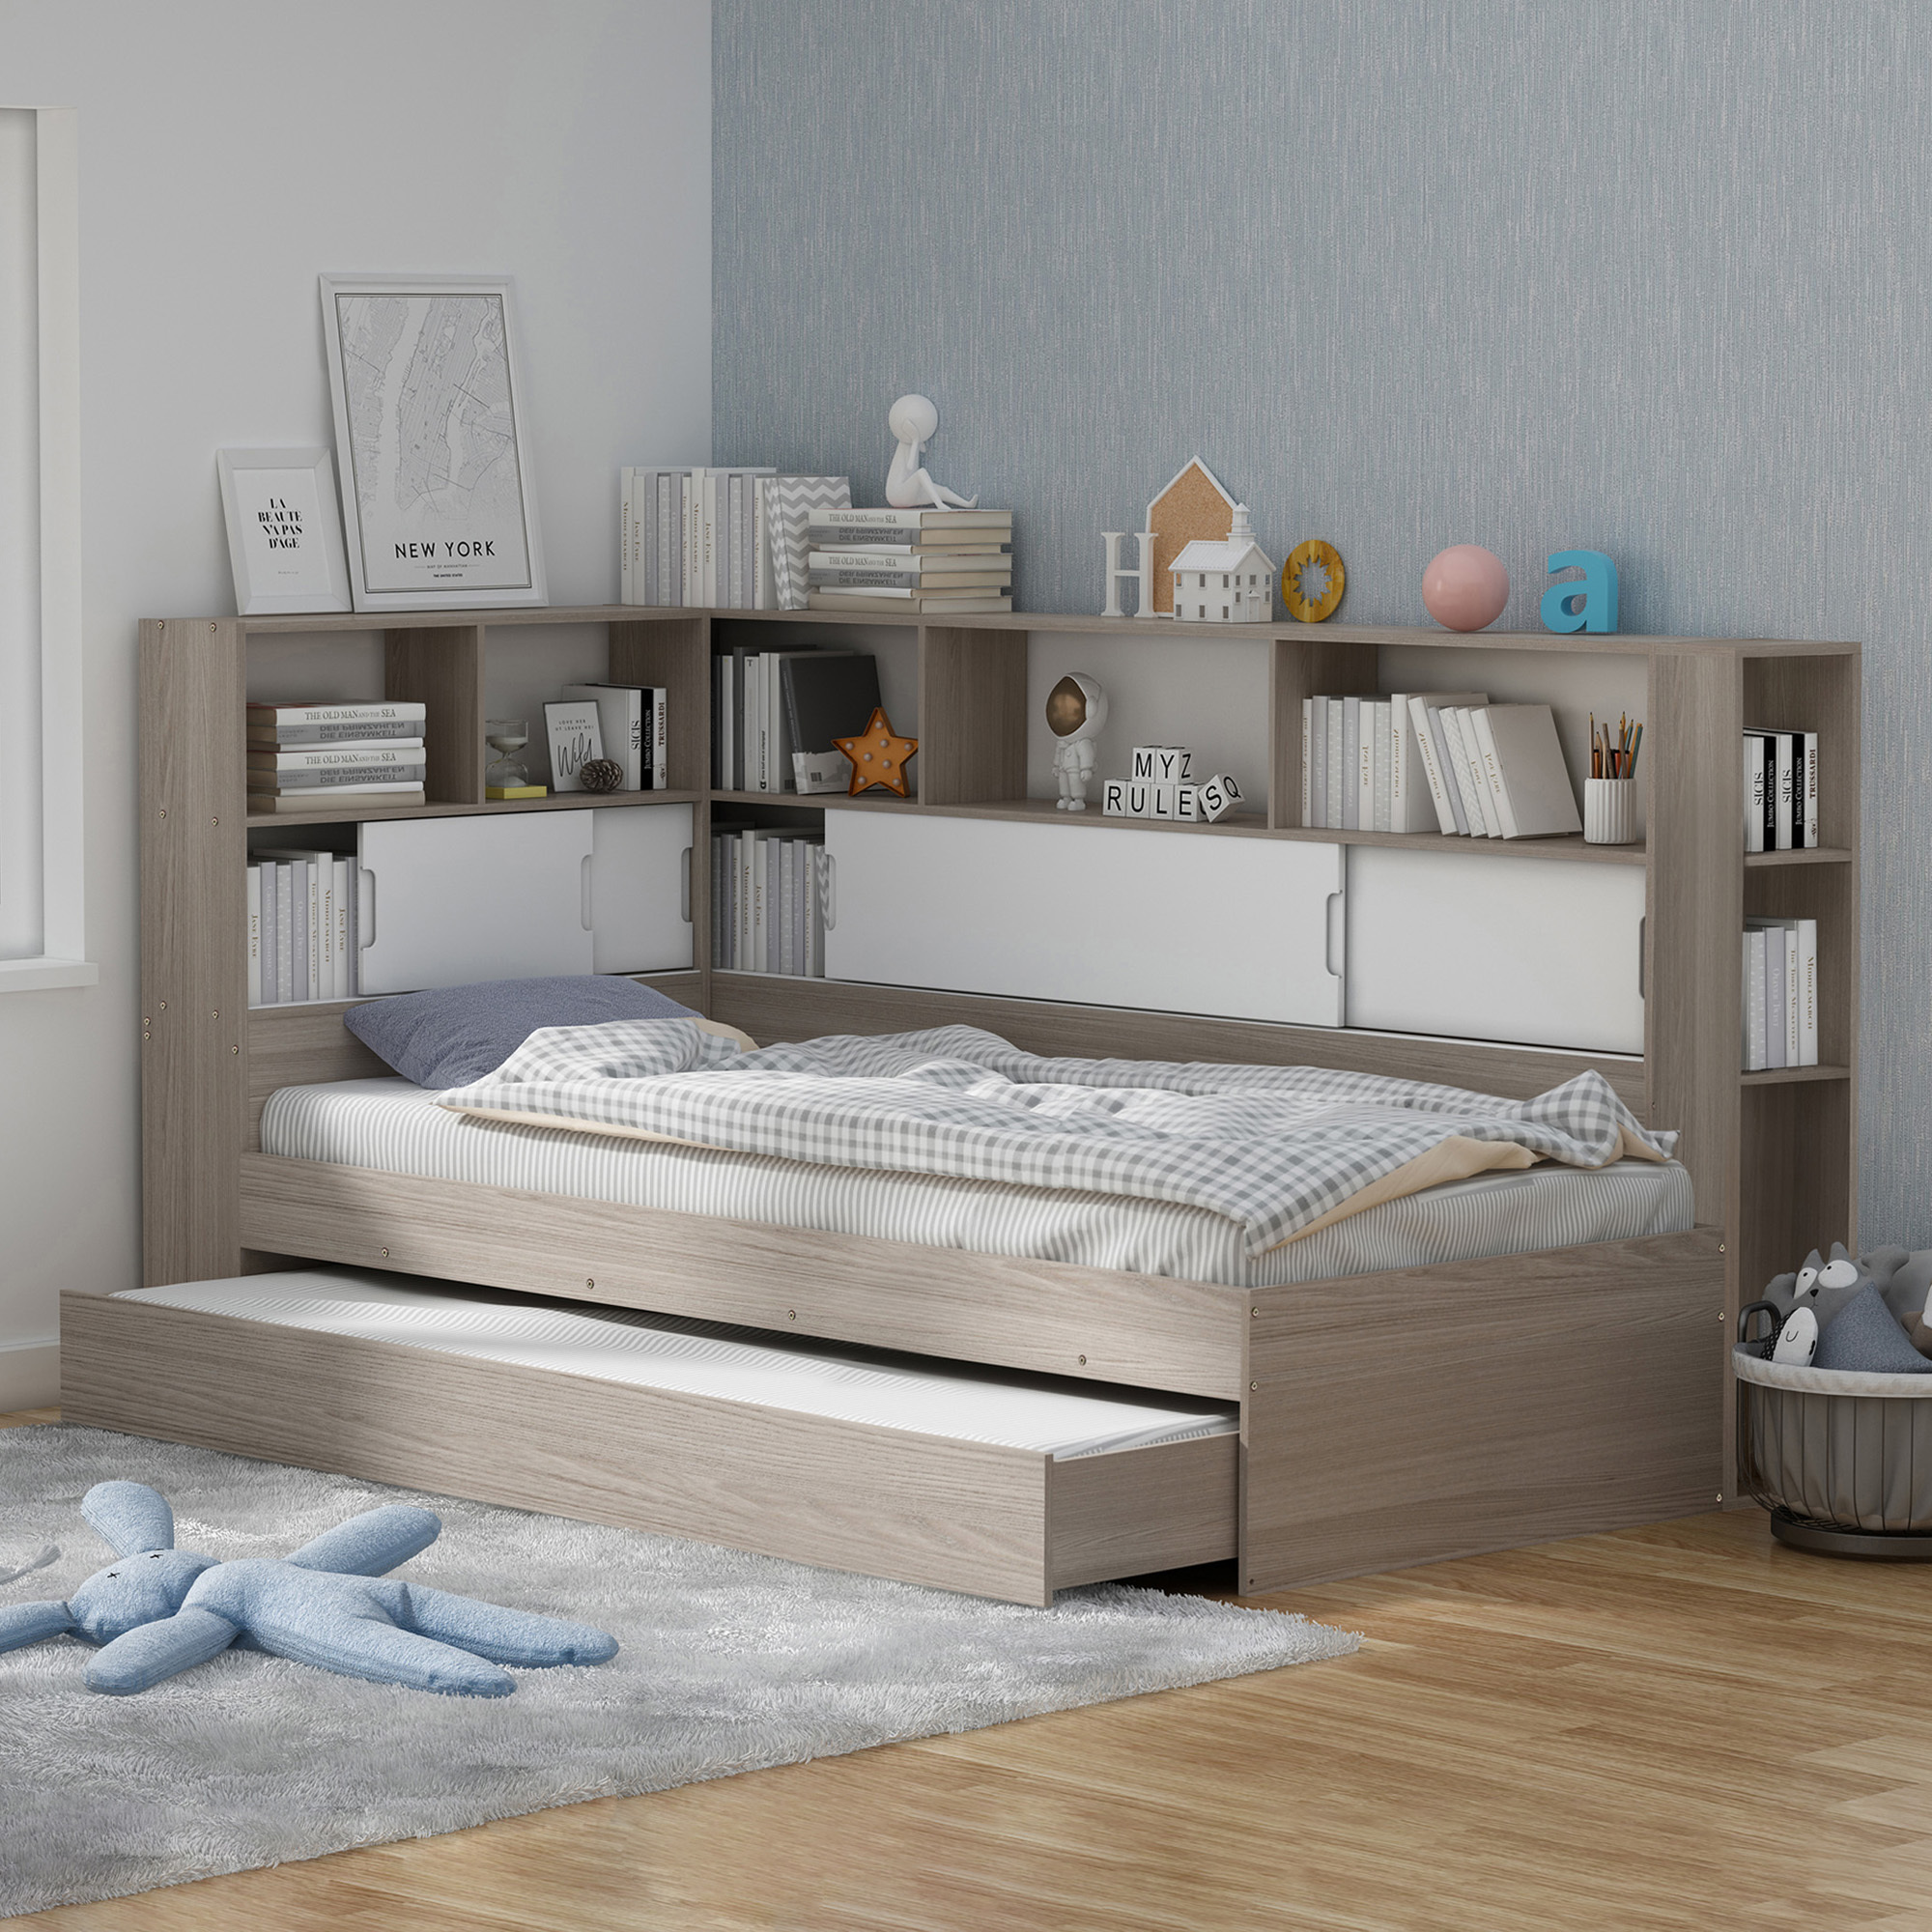 Quentin Storage Bed With Wall Tower, Bookshelf Storage Bed King